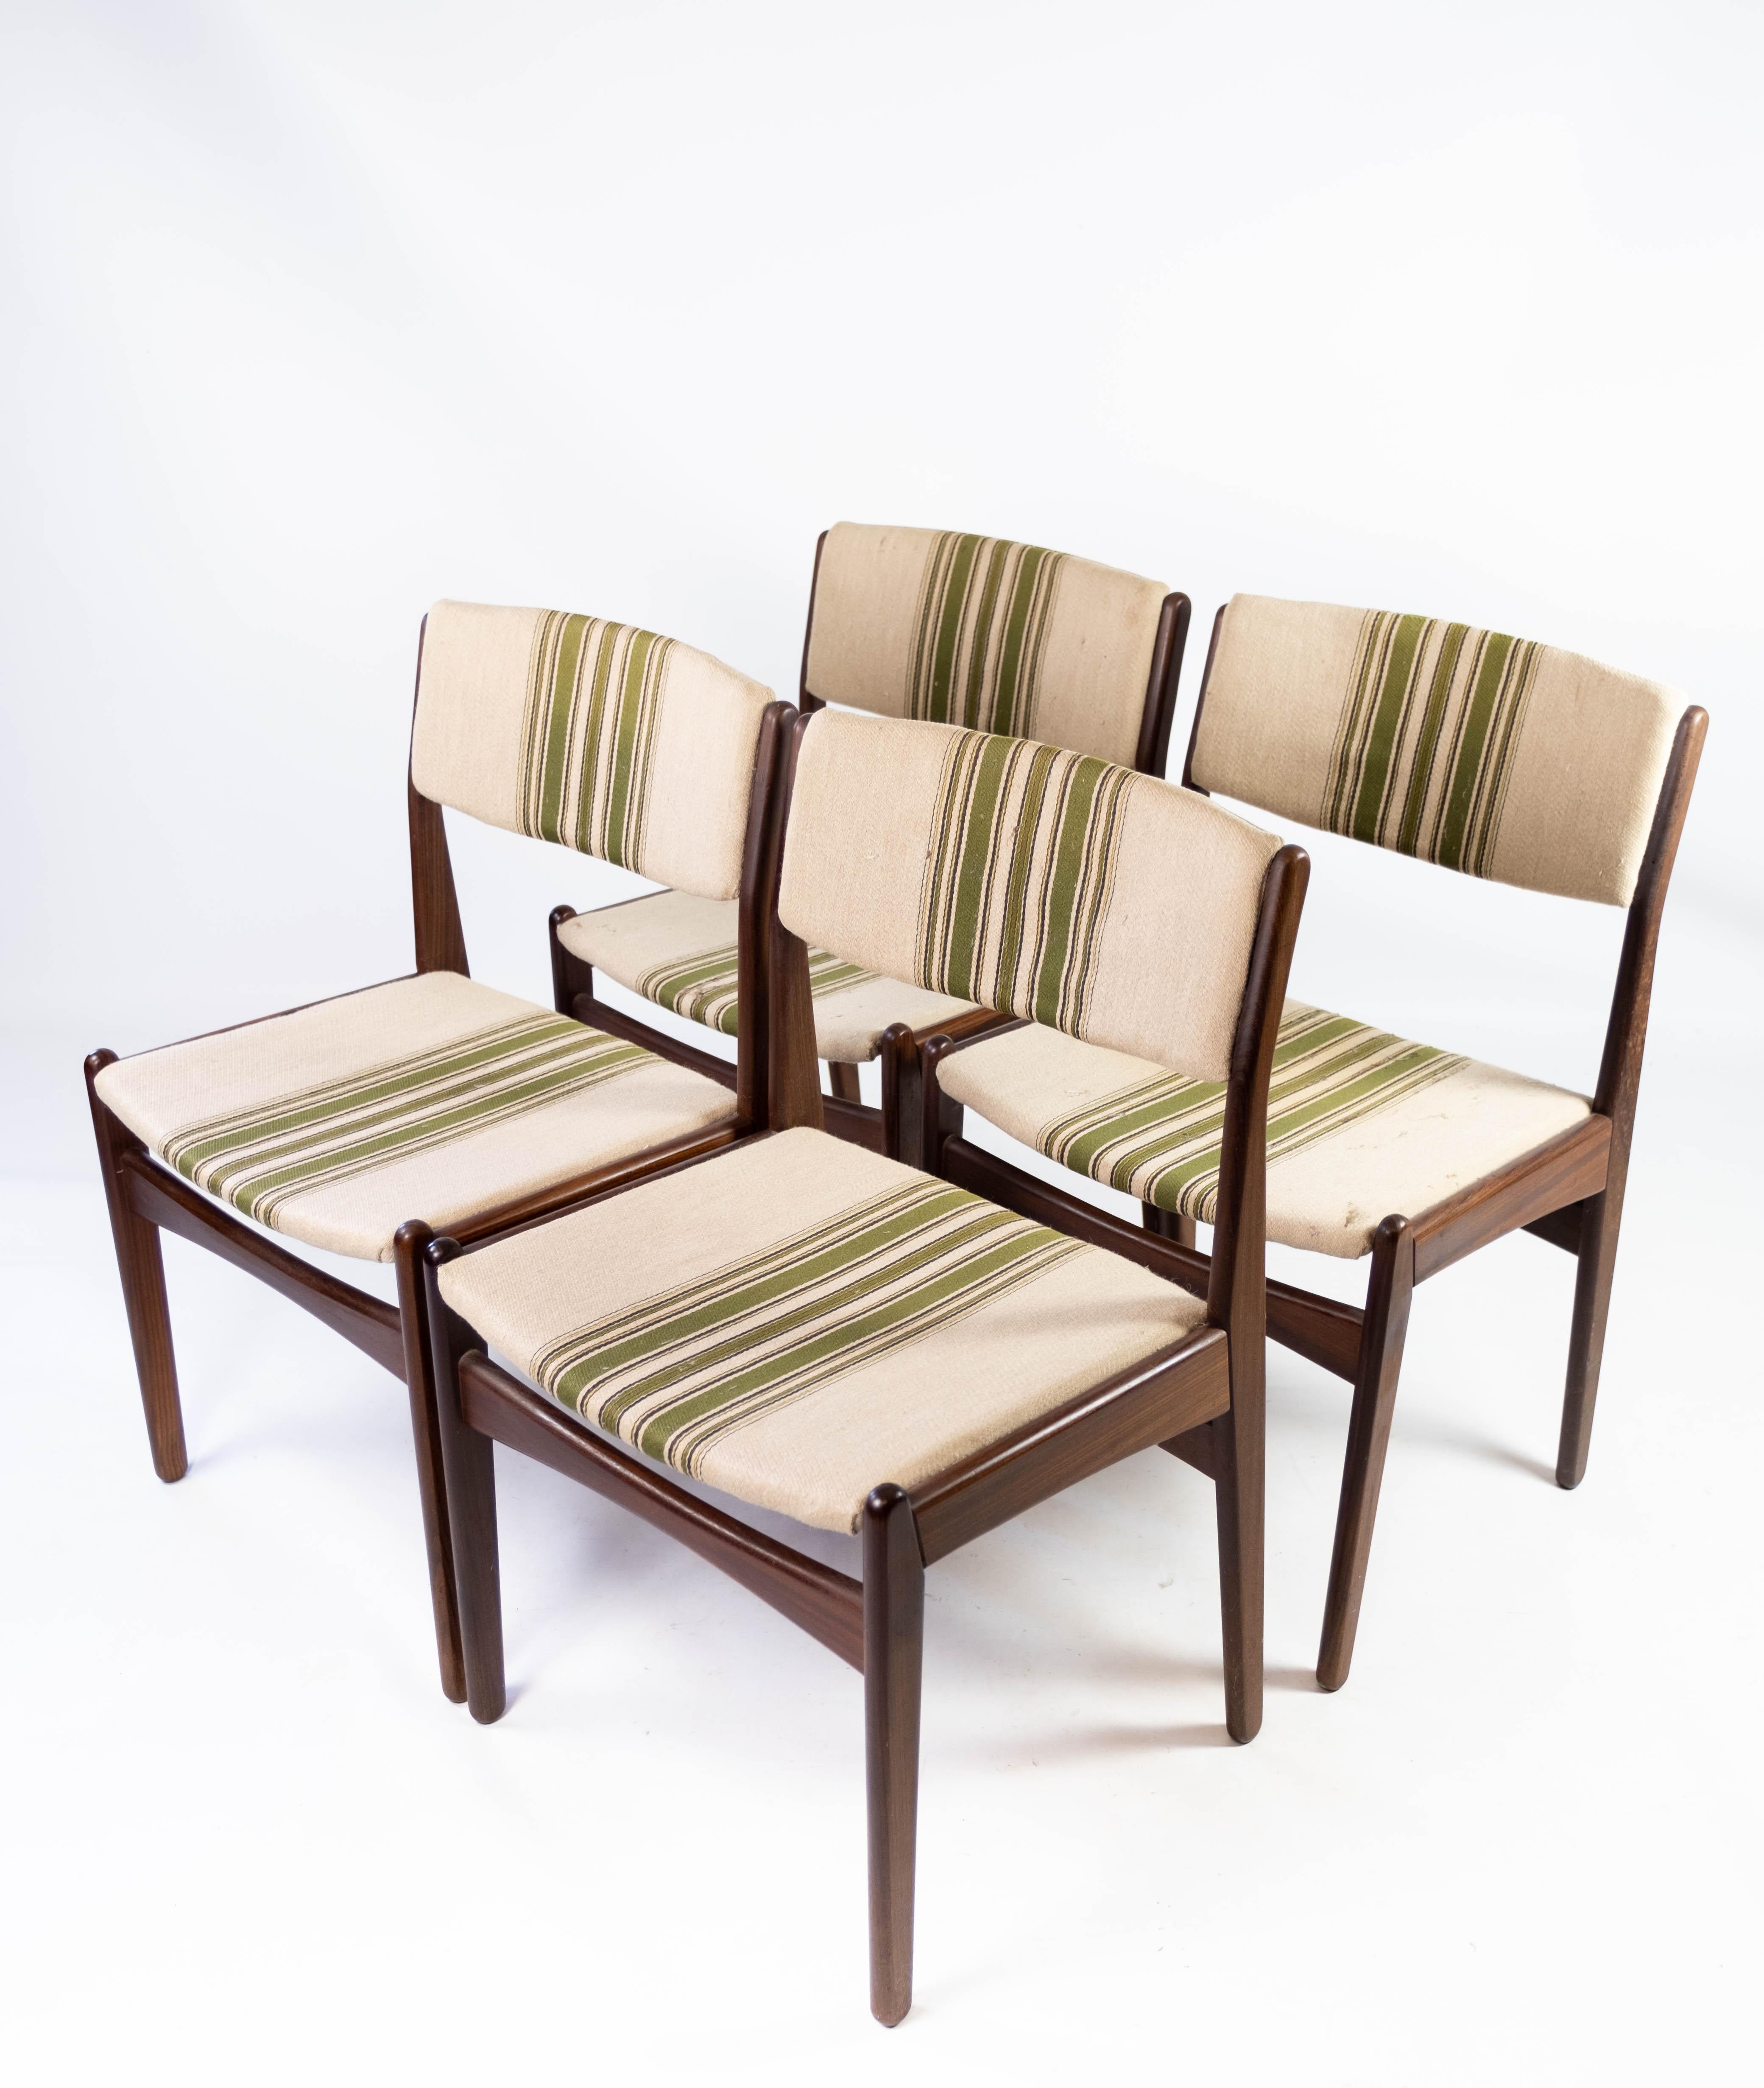 Danish Set of Four Dining Room Chairs in Teak by Erik Buch, 1960